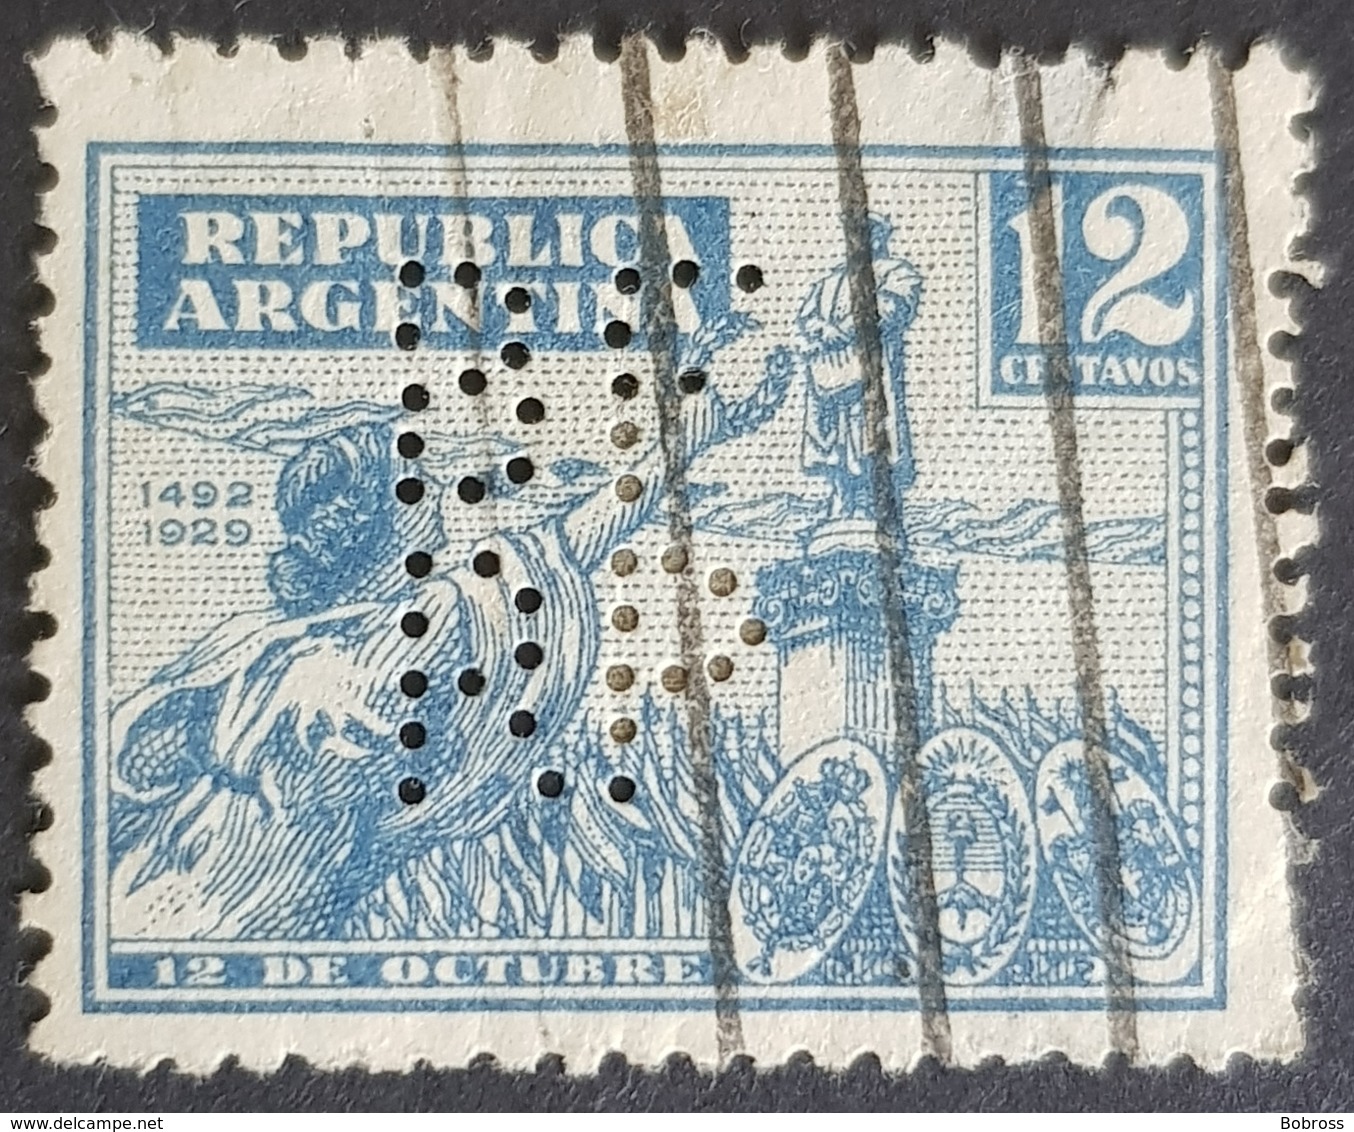 1929, The 437th Anniversary Of The Discovery Of America, Republica, Argentina, *,**, Or Used - Used Stamps